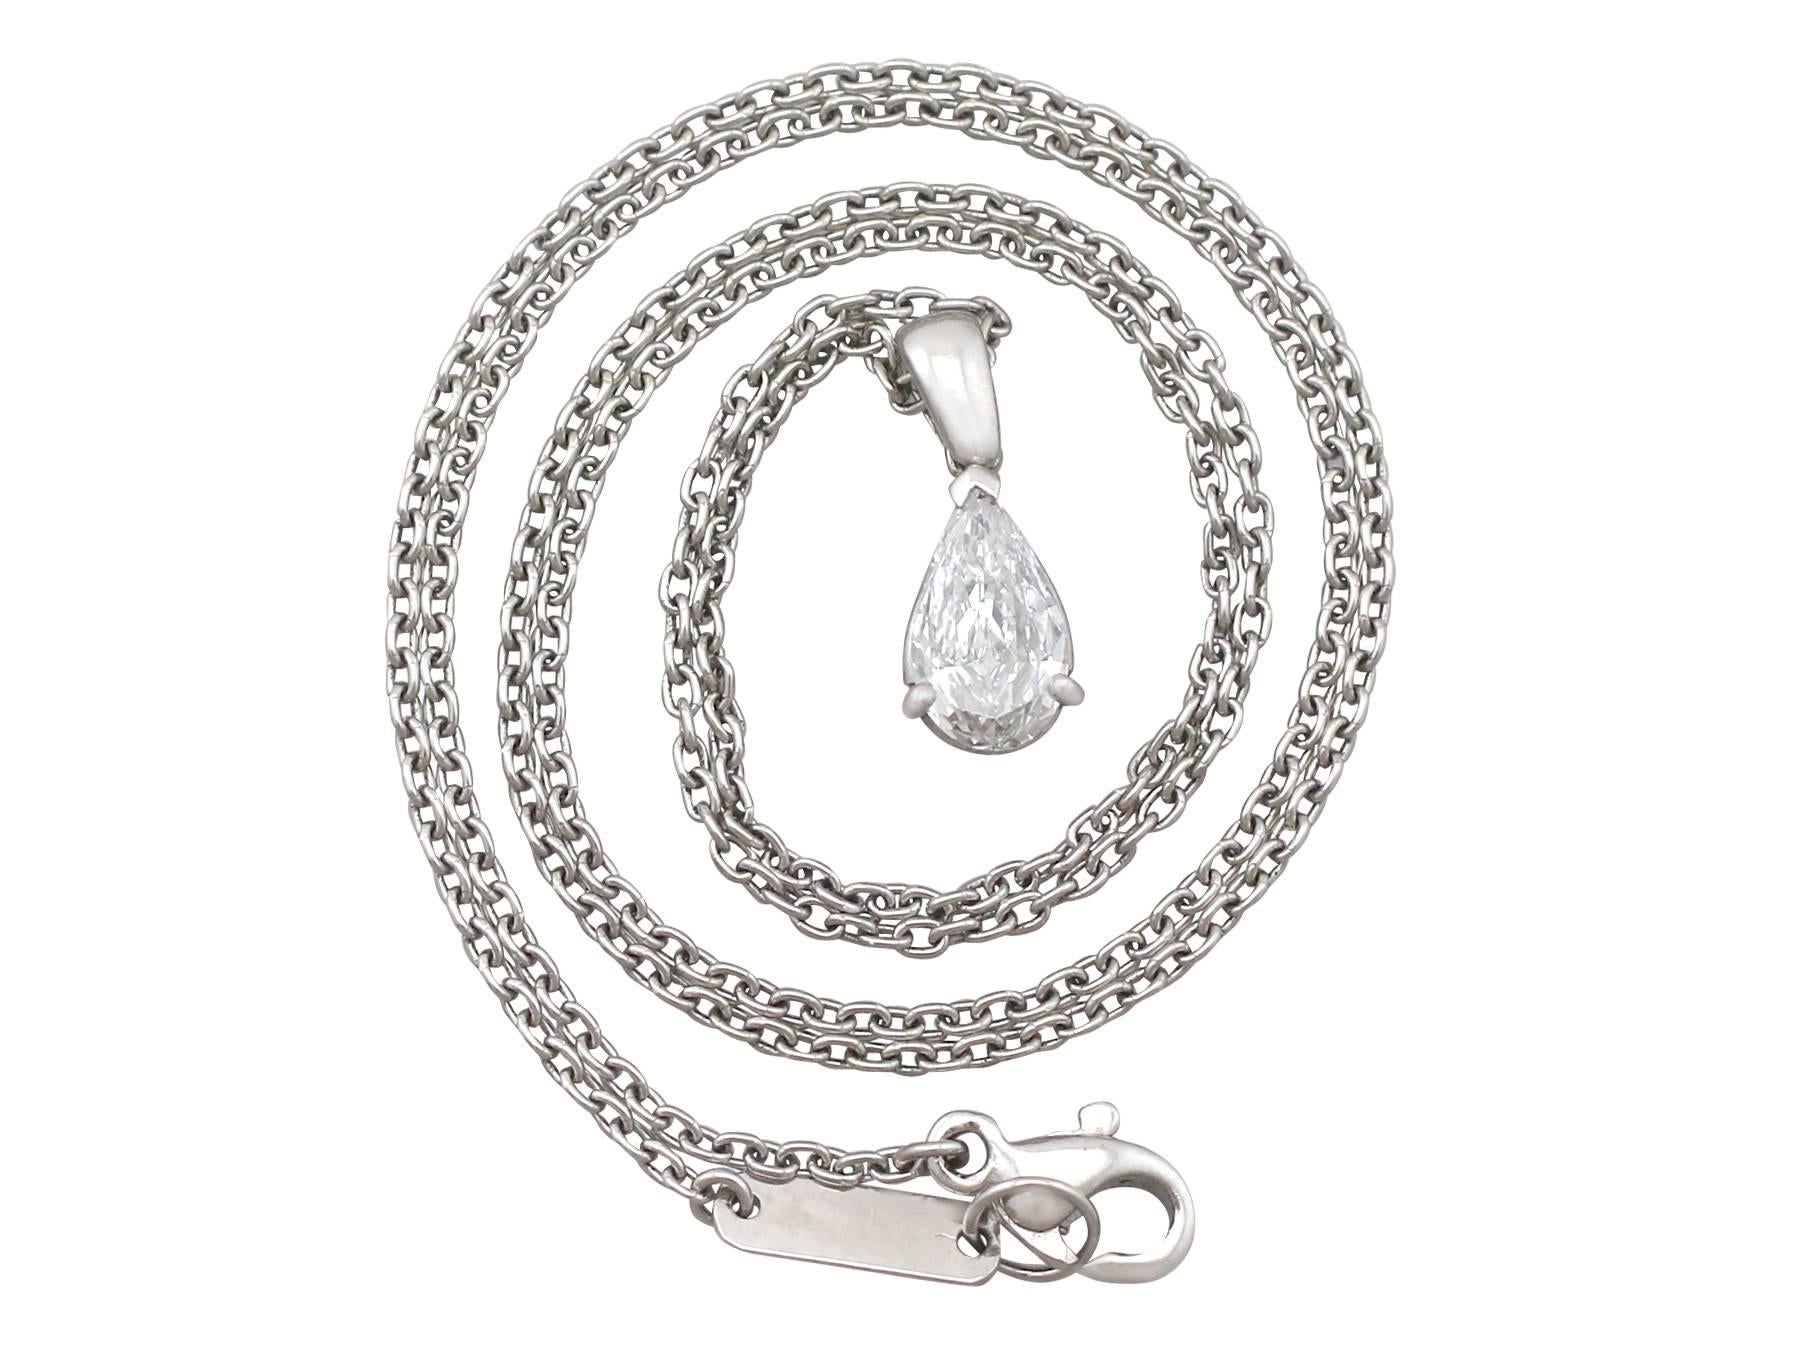 An exceptional, fine and impressive 0.60 carat diamond and platinum solitaire pendant by David Morris; part of our diverse vintage jewellery and estate jewelry collections

This exceptional vintage pear cut diamond pendant has been crafted in